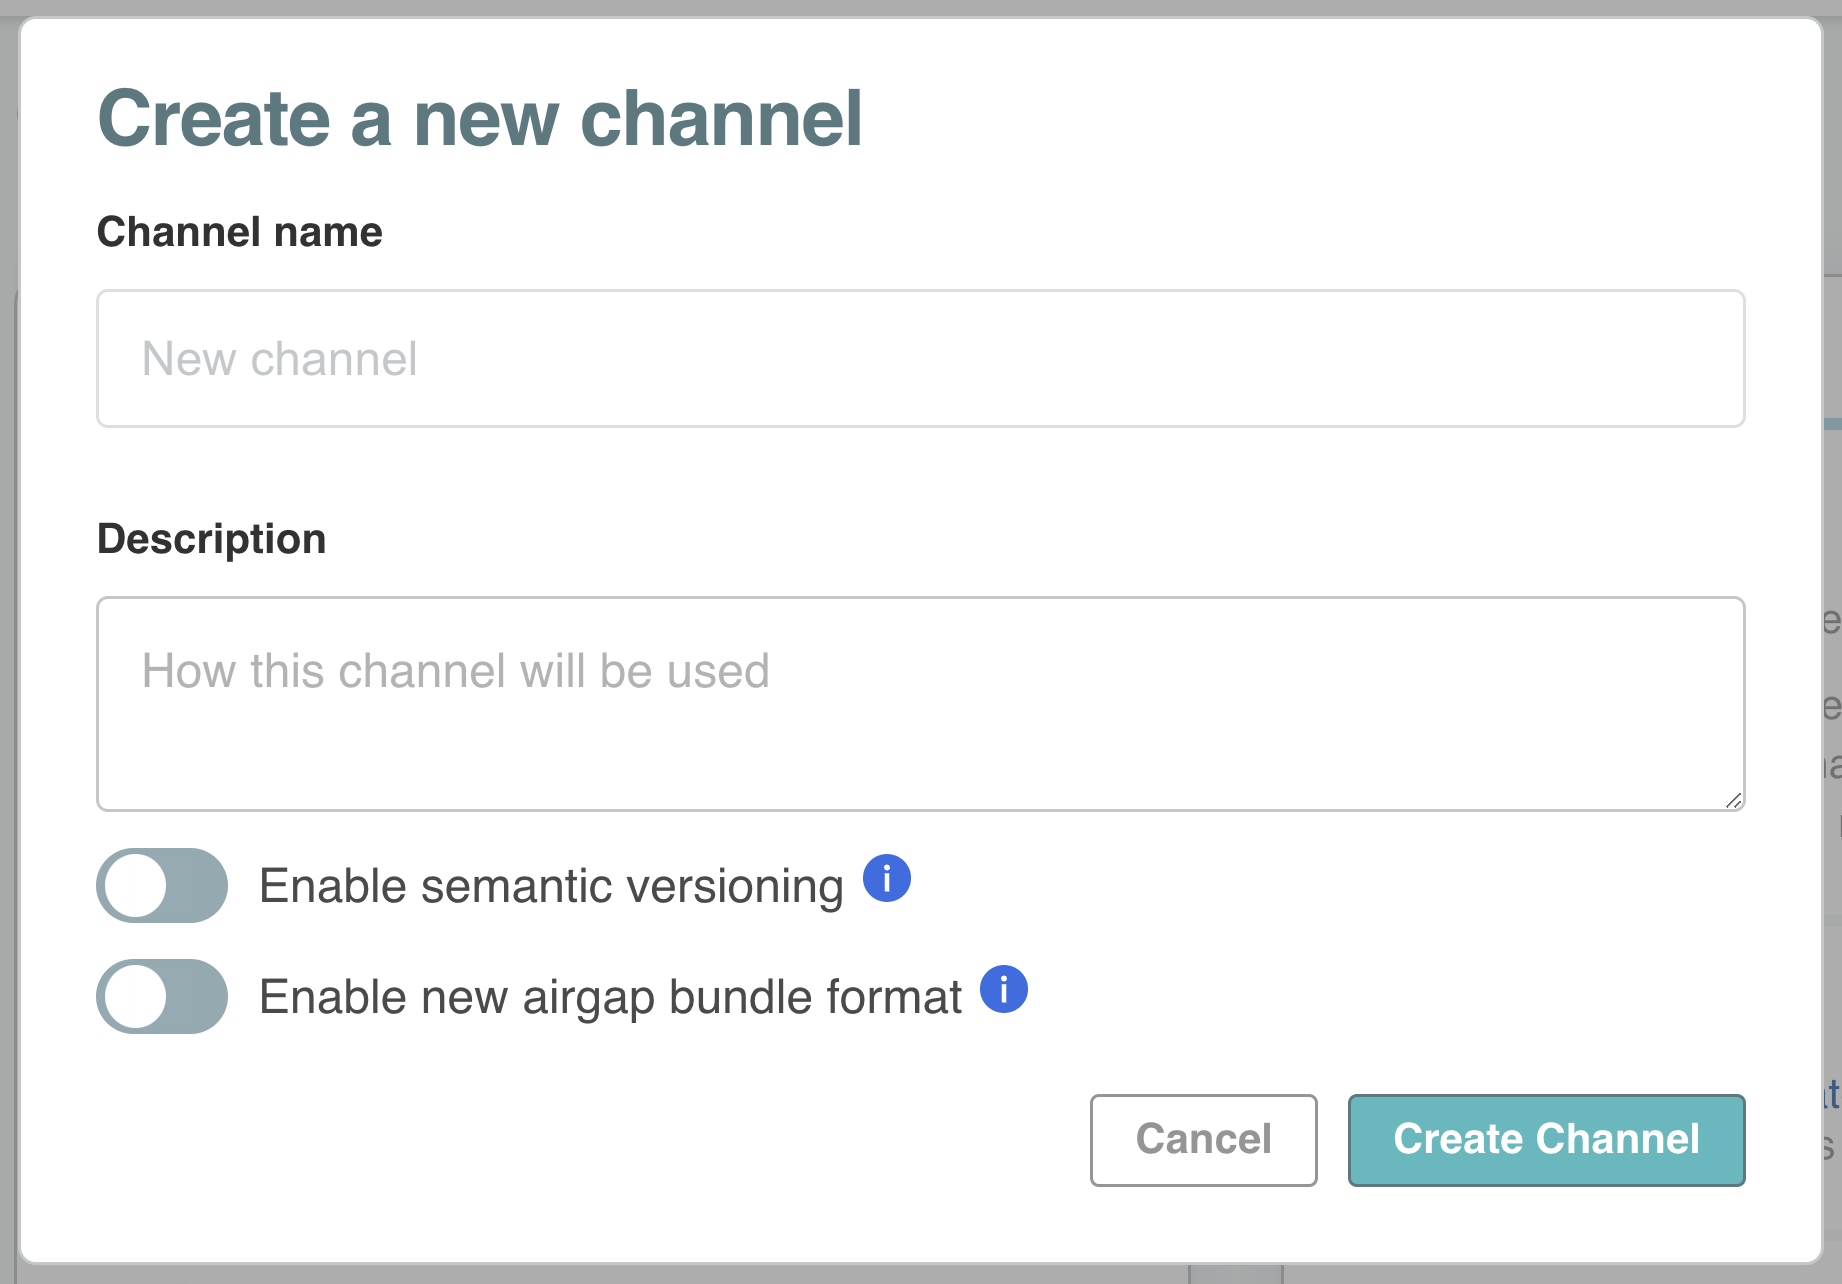 Create channel dialog